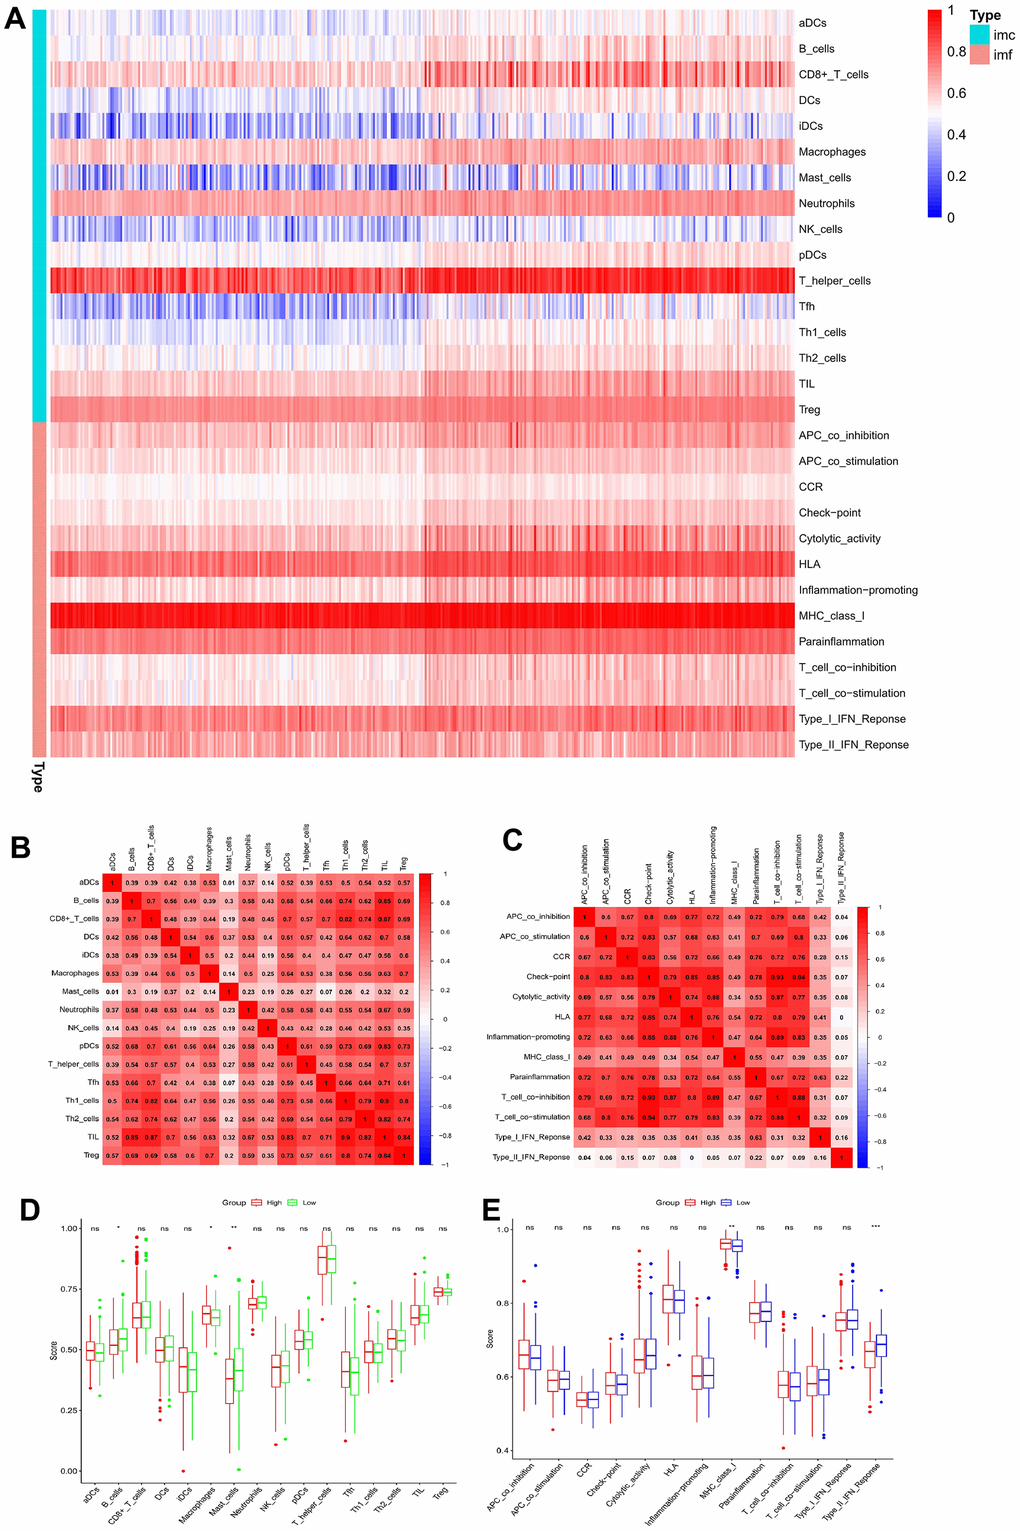 Correlation analysis between ssGSEA scores and immune cells or immune functions. (A) Heatmap of immune infiltration based on ssGSEA. Immune cells and immune functions are represented by imc and imf, respectively. (B) Correlation analysis of various immune cells. (C) Correlation analysis of various immune functions. (D) Box plots for comparing the ssGSEA scores of various immune cells in the high-risk and low-risk groups. (E) Box plots for comparing the ssGSEA scores of various immune functions in the high-risk and low-risk groups (*p 